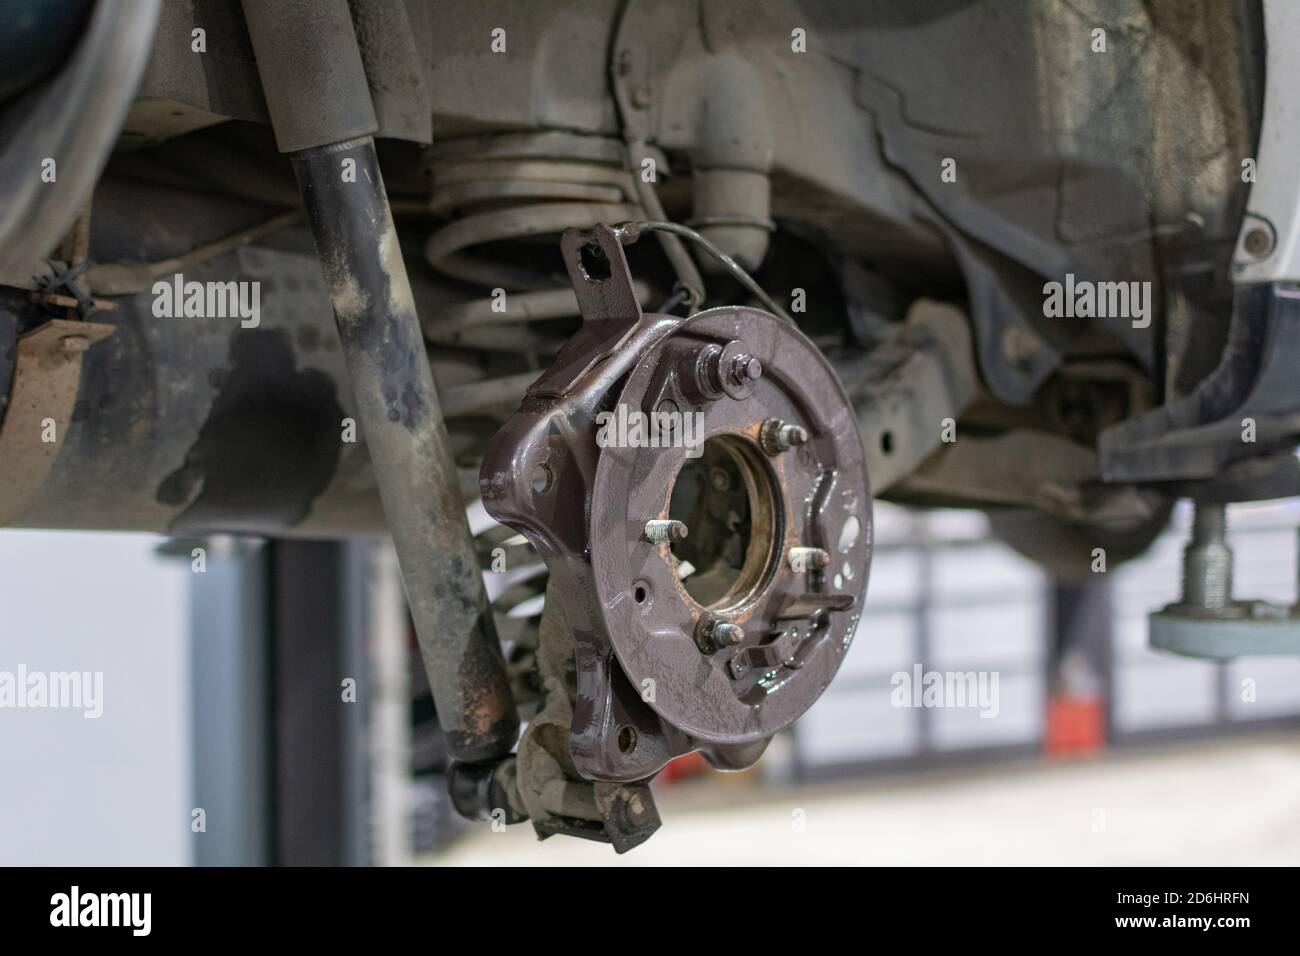 Car in service. Detail of the wheel hub assembly on automobile. Stock Photo